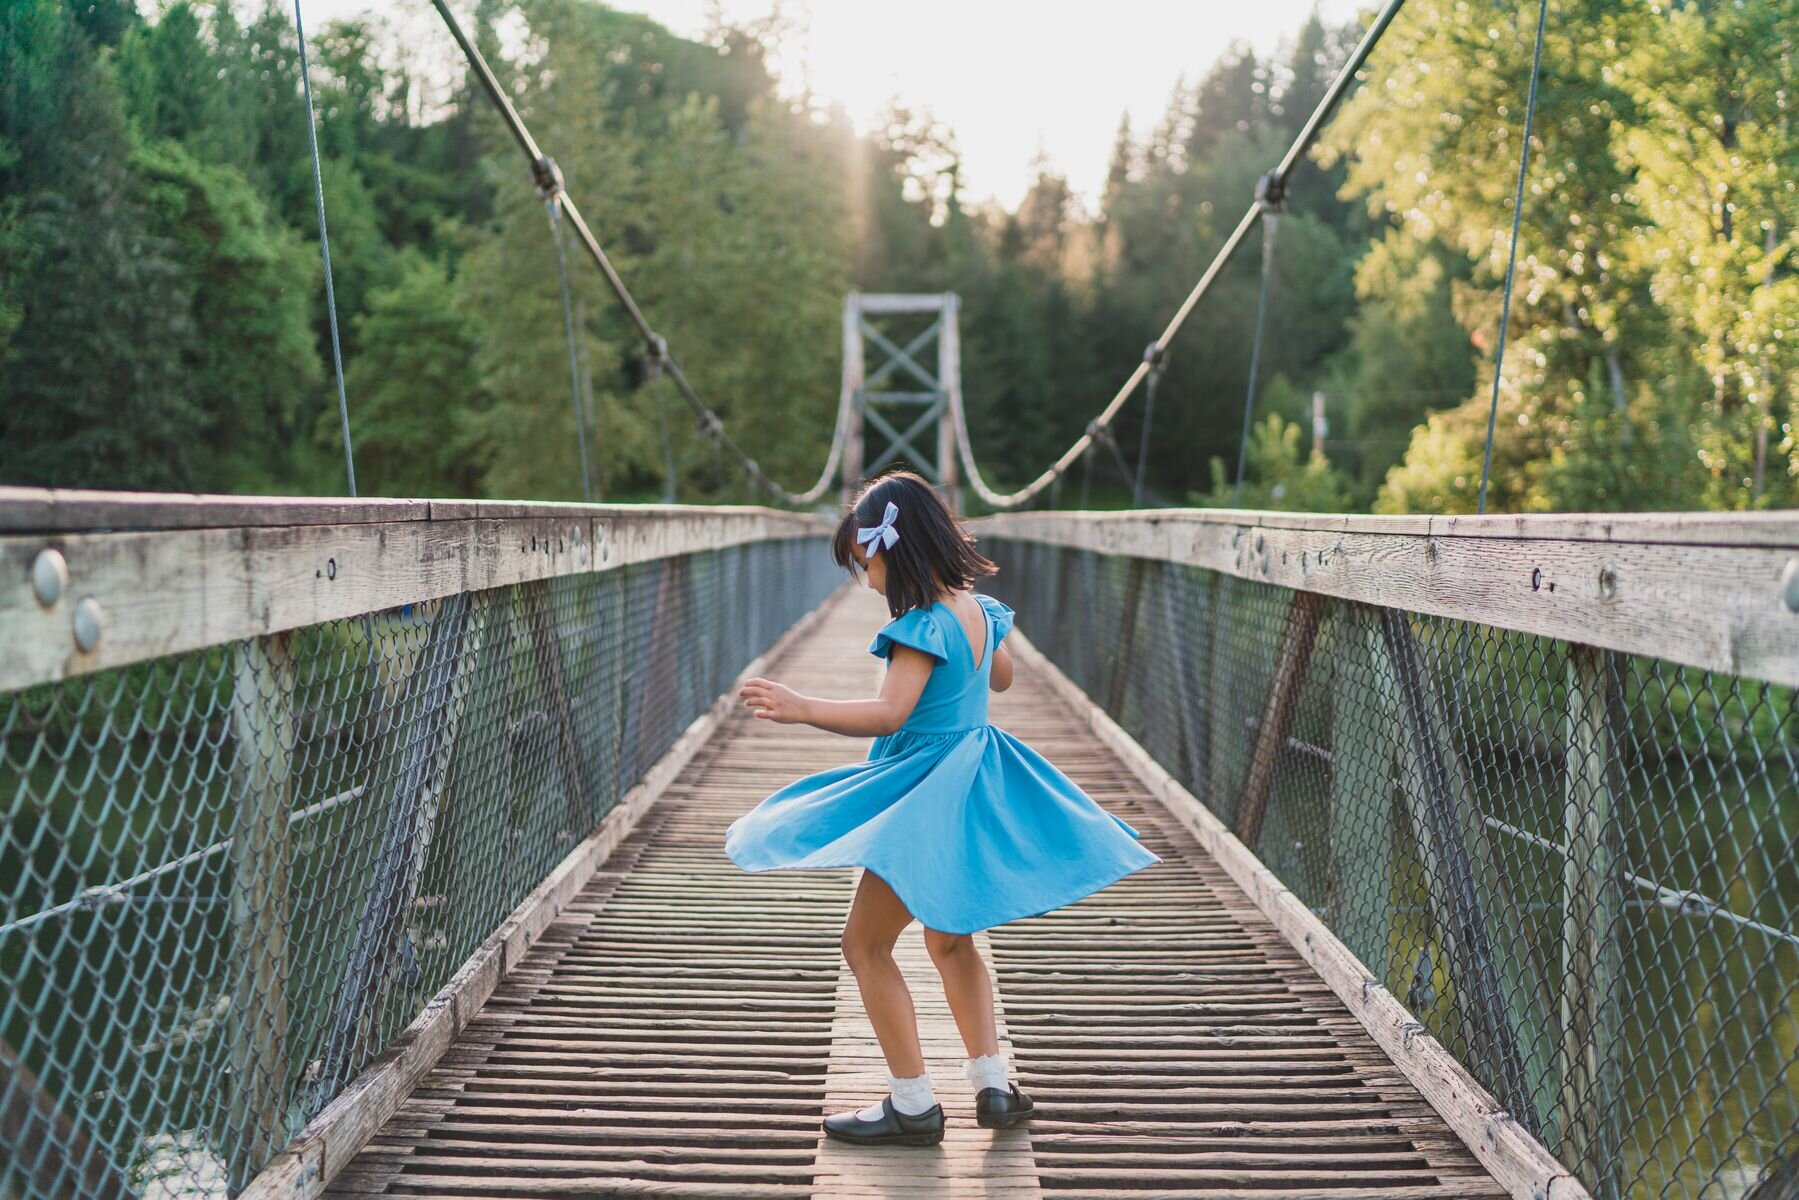 Issaquah girl twirling her dress - Issaquah family photographer